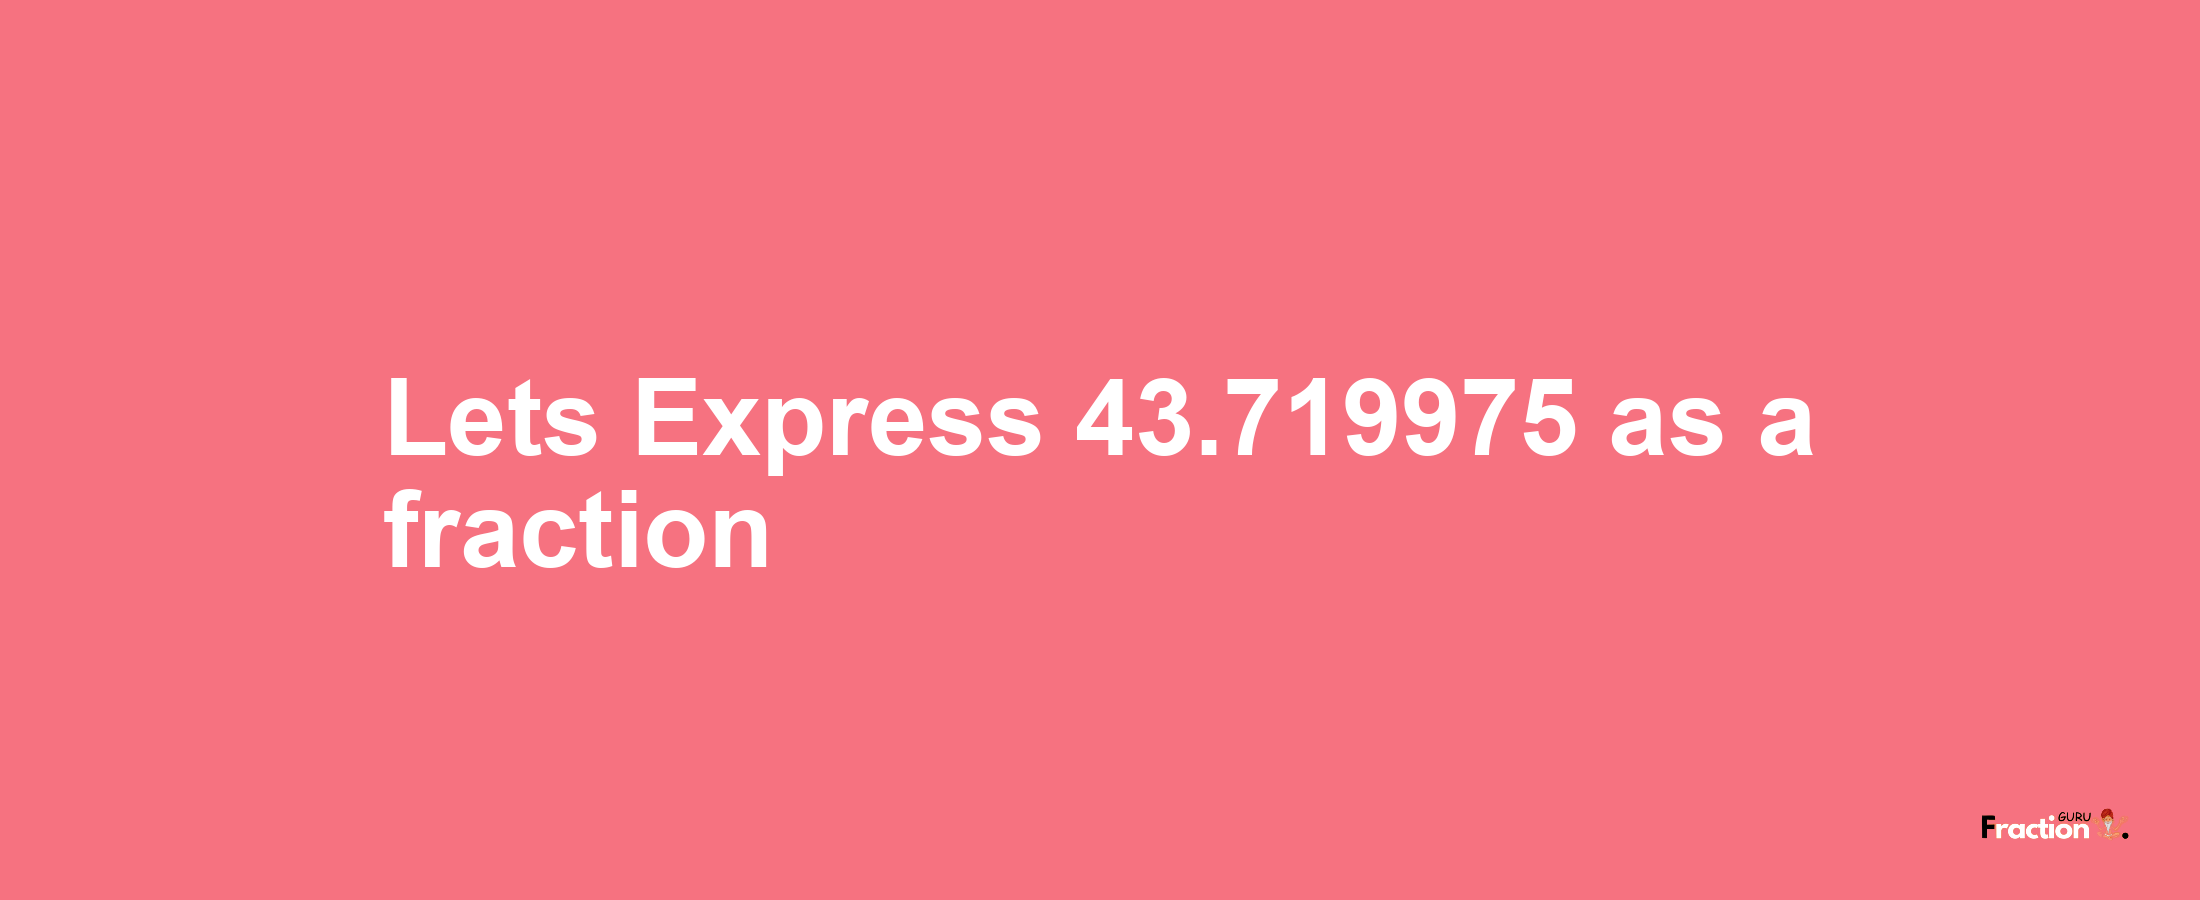 Lets Express 43.719975 as afraction